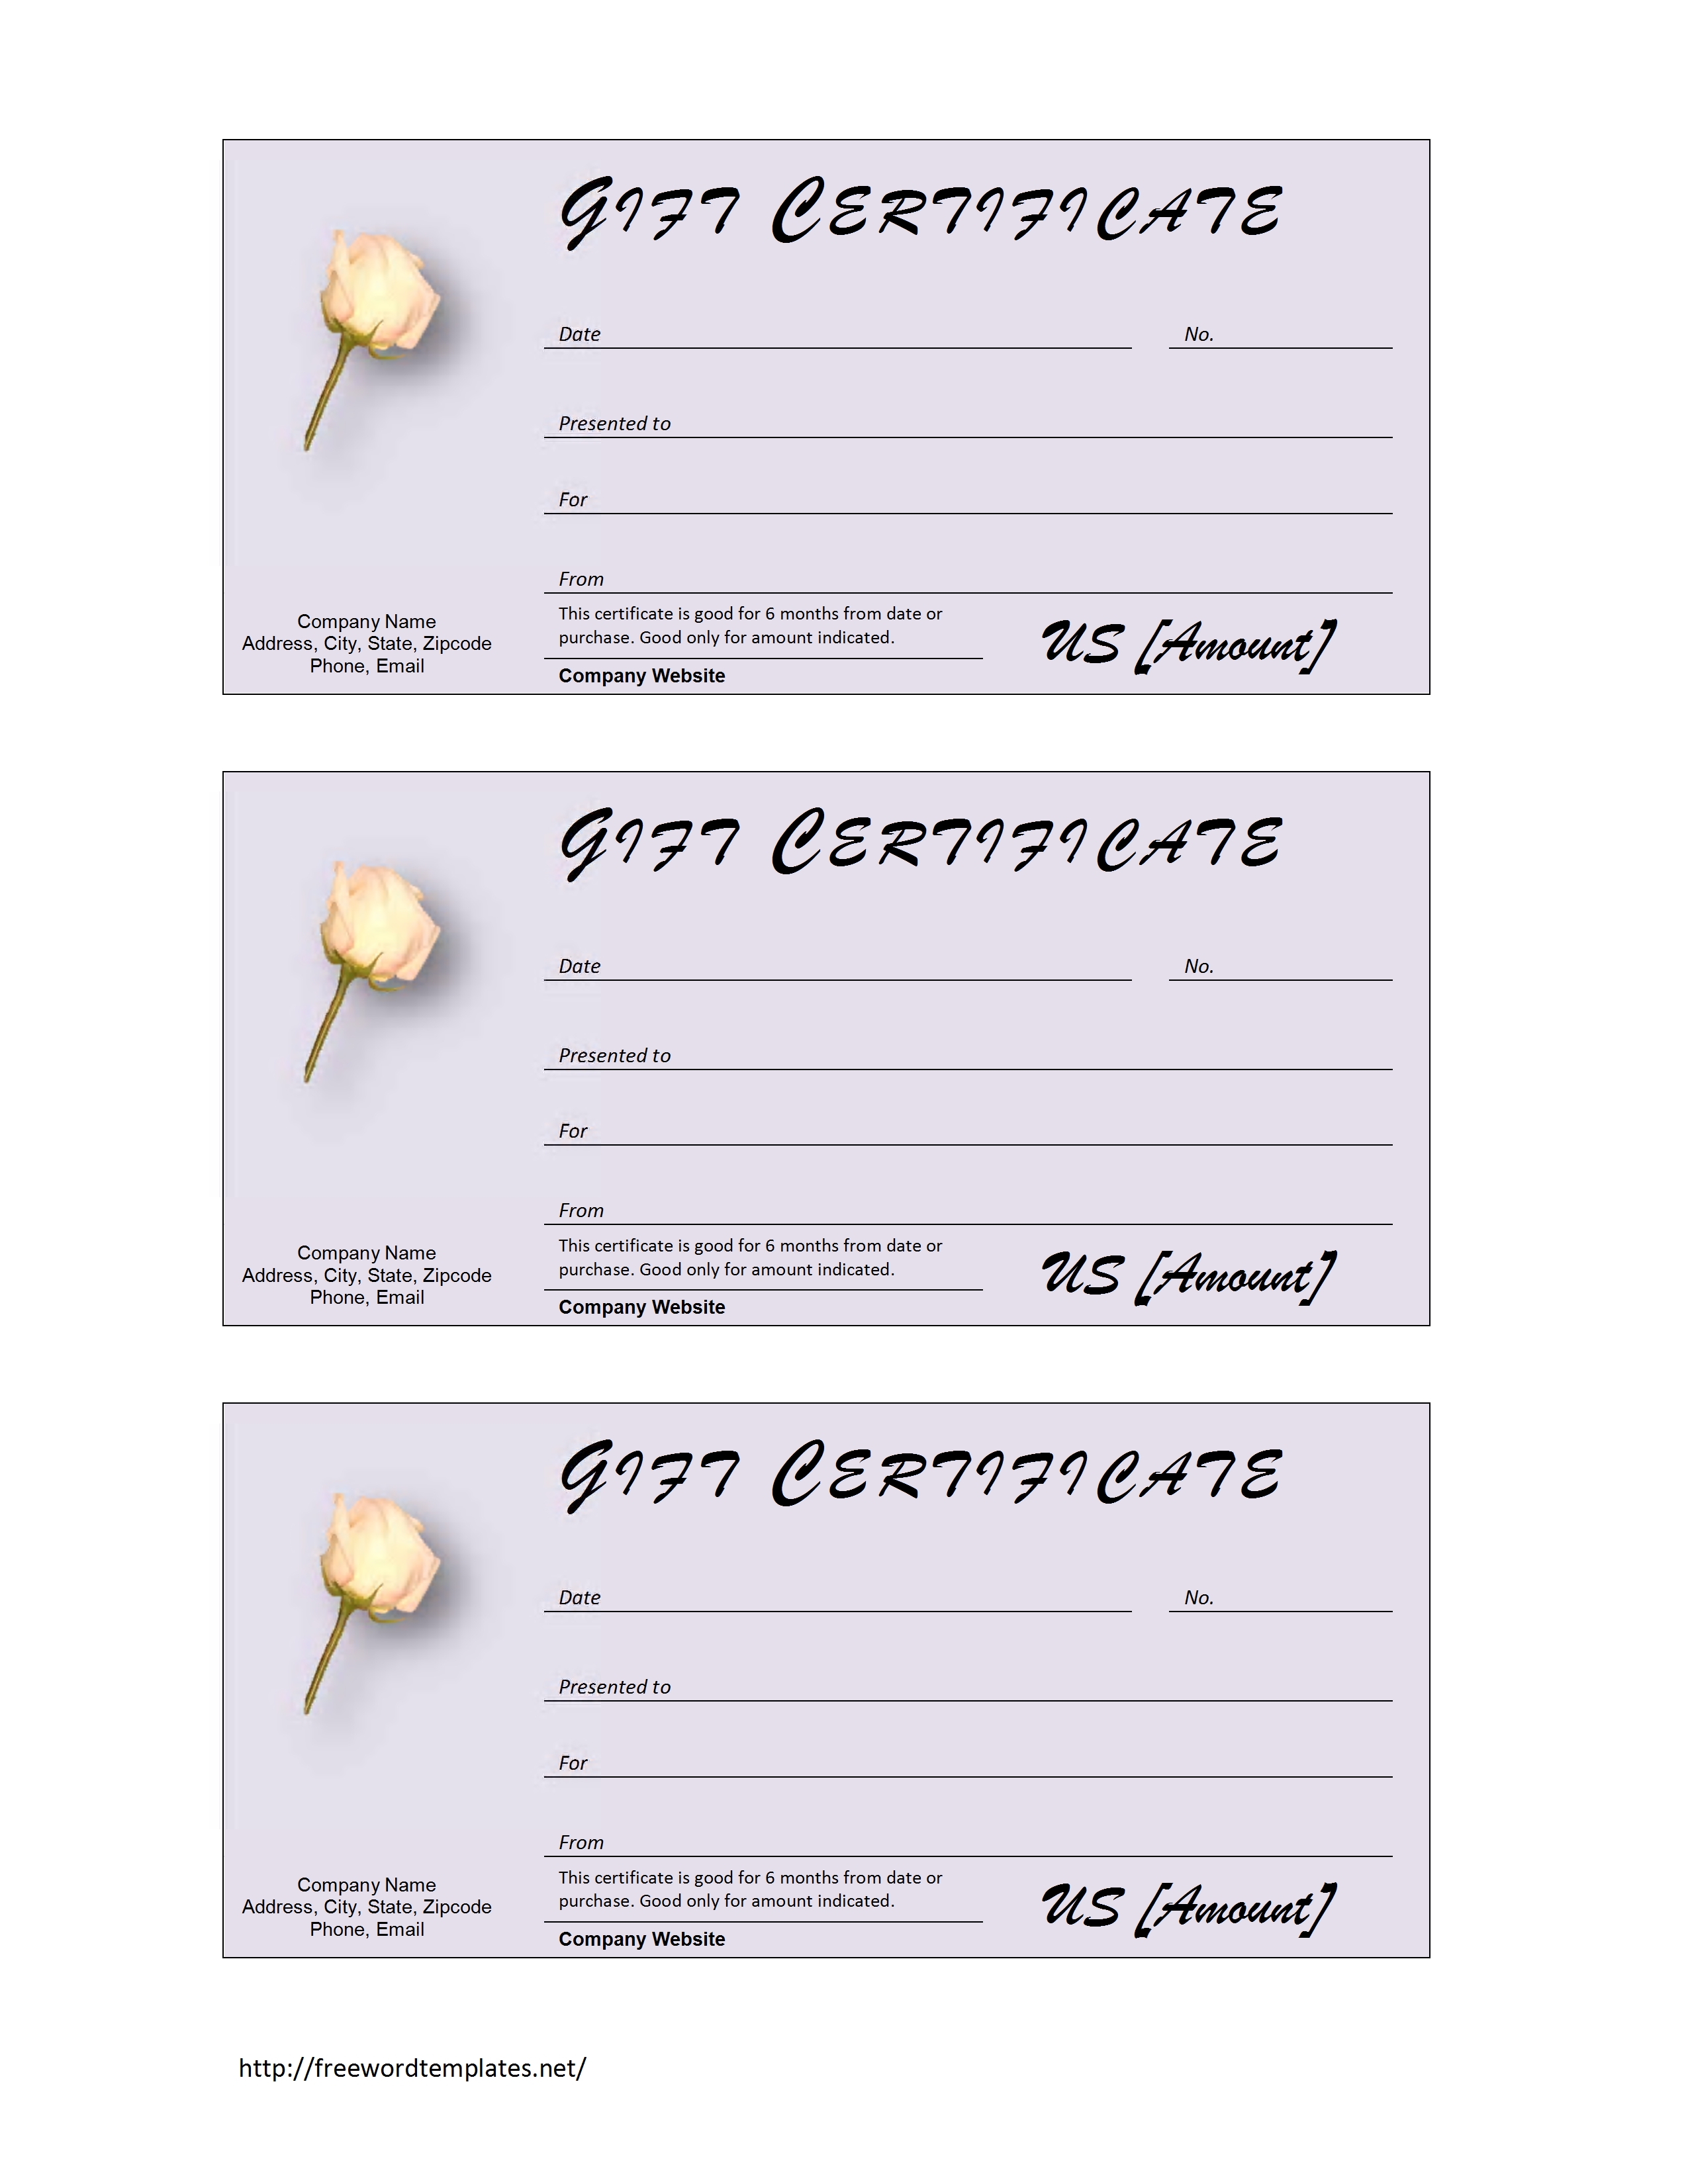 Donation Gift Certificate Template